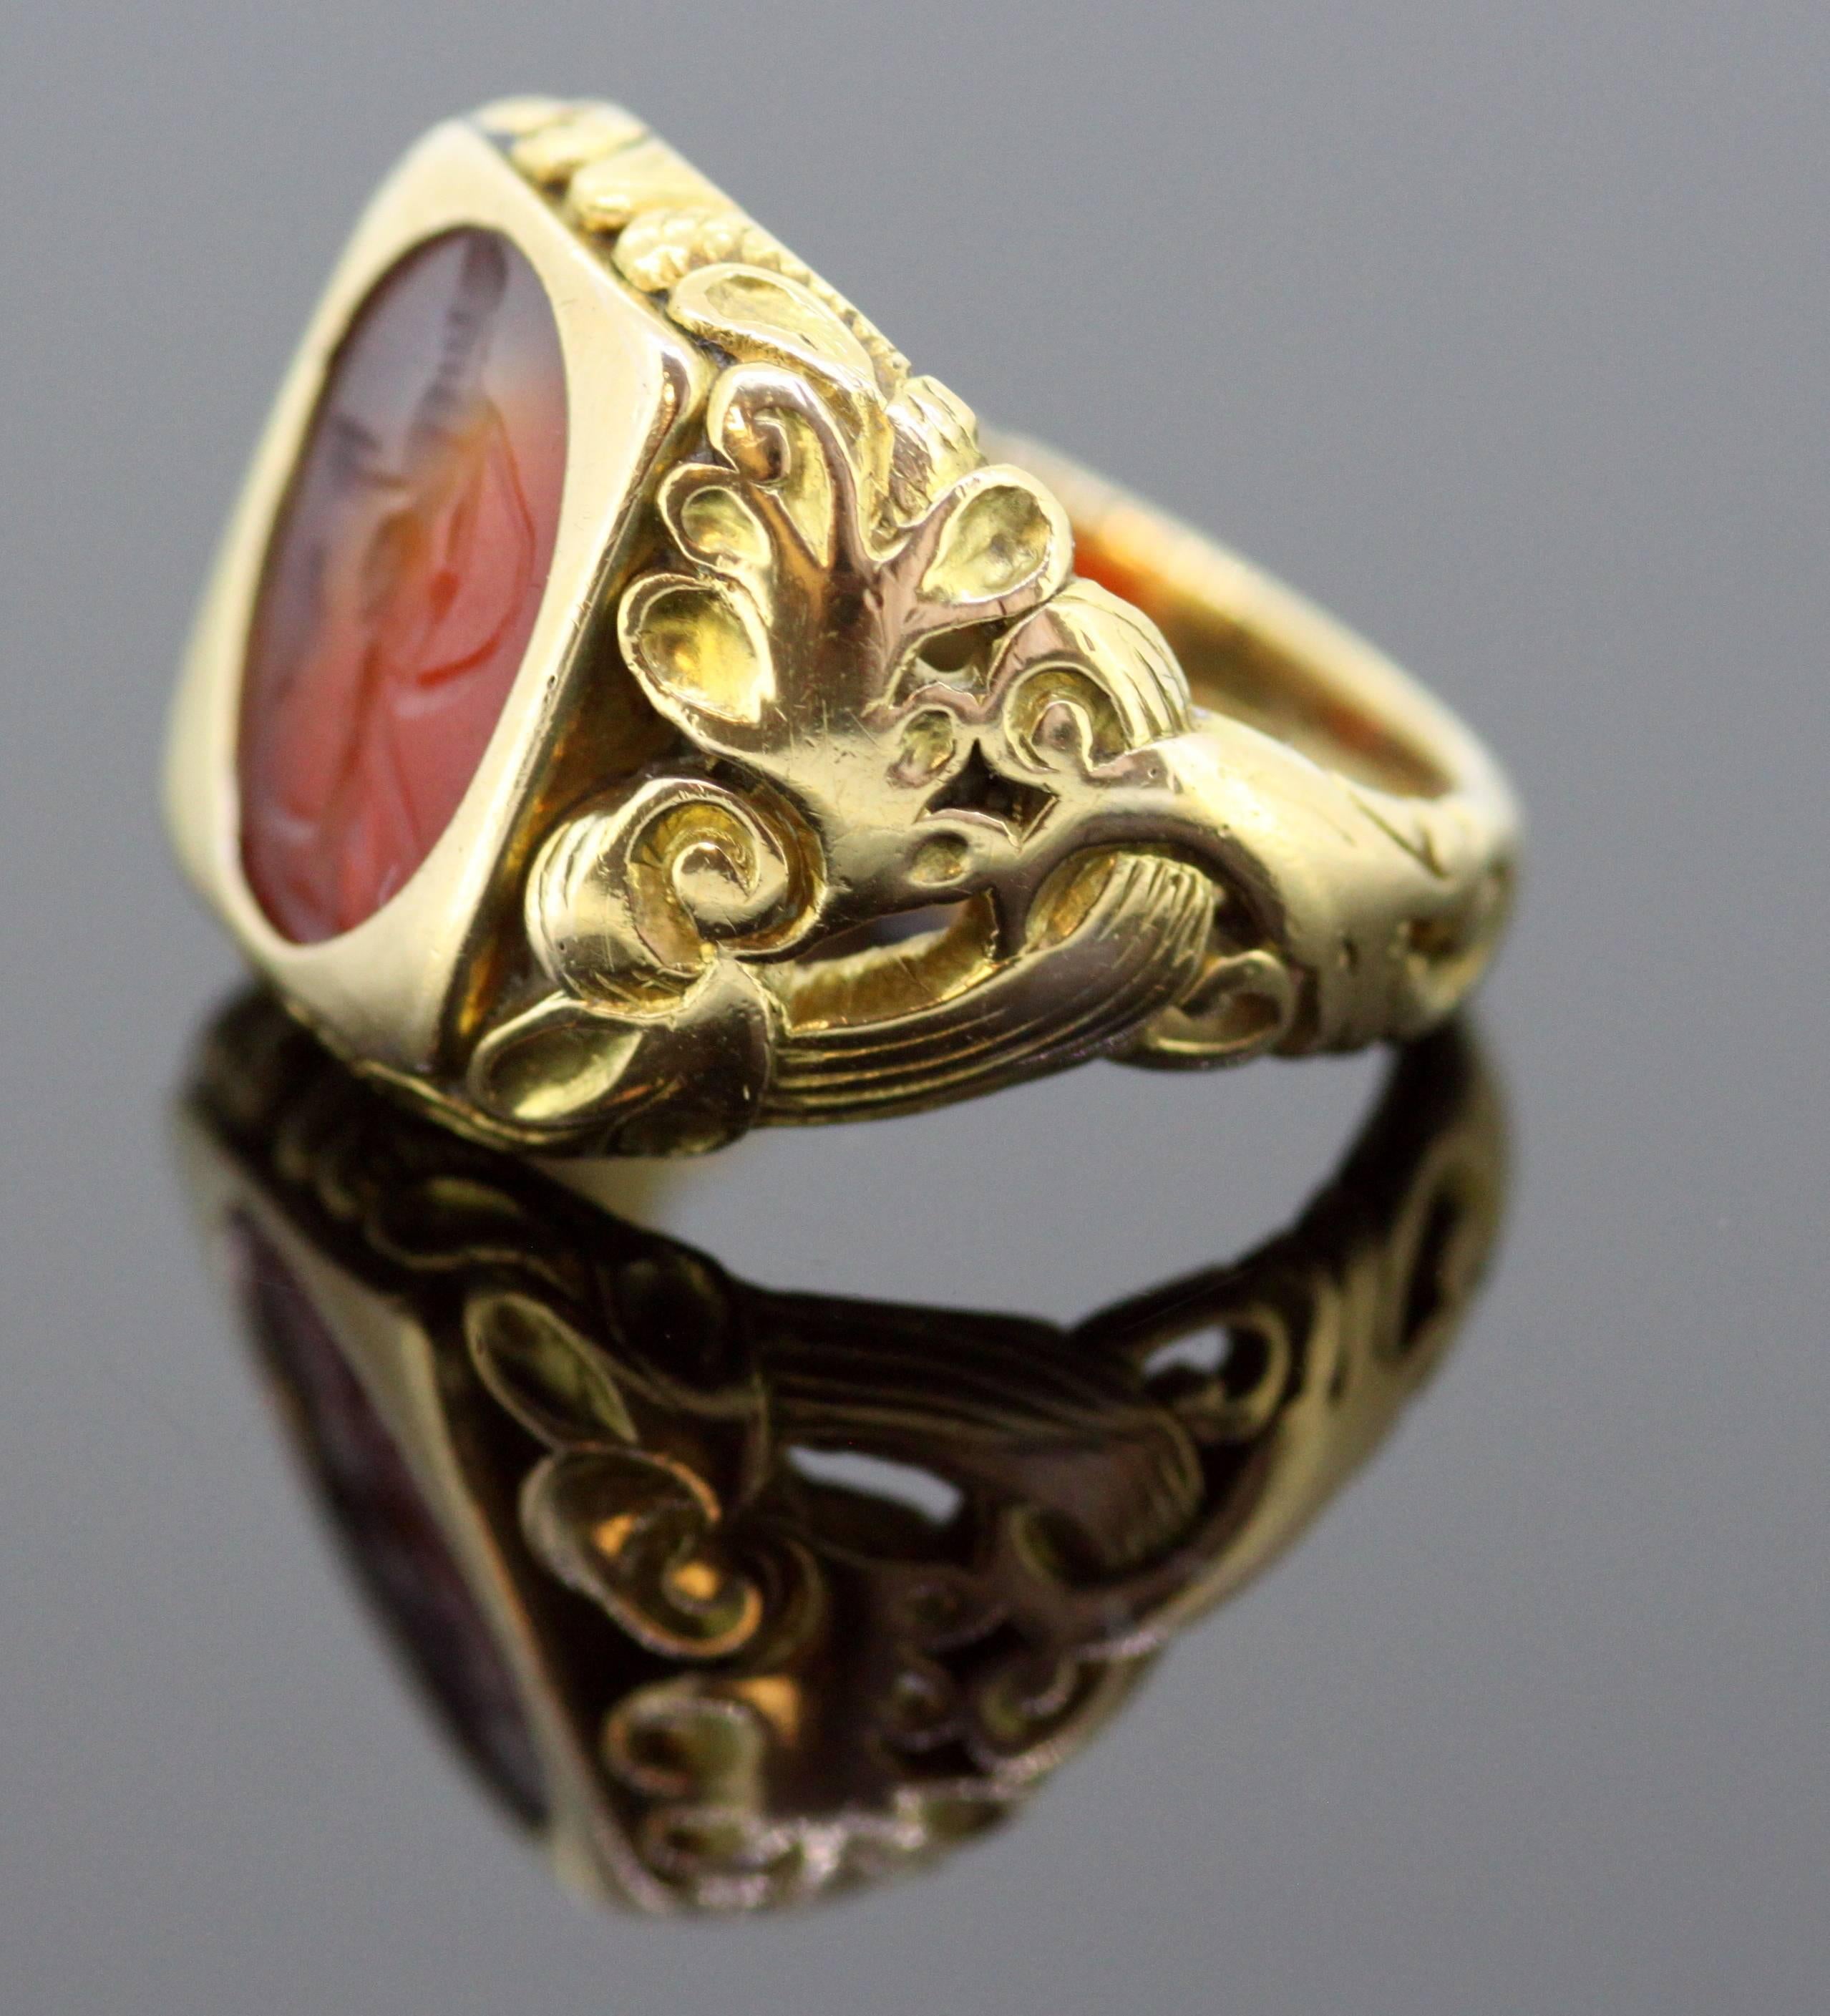 An antique 18K yellow gold ring, with a Roman carnelian seal of the period 200 BC, with added later beautifully engraved shank of the ring which is circa 1940's 

Dimensions - 
Finger Size UK : Q US : 8 1/2 EU: 57 1/2 
Ring Size : 2.6 x 2.4 x 1.9 cm